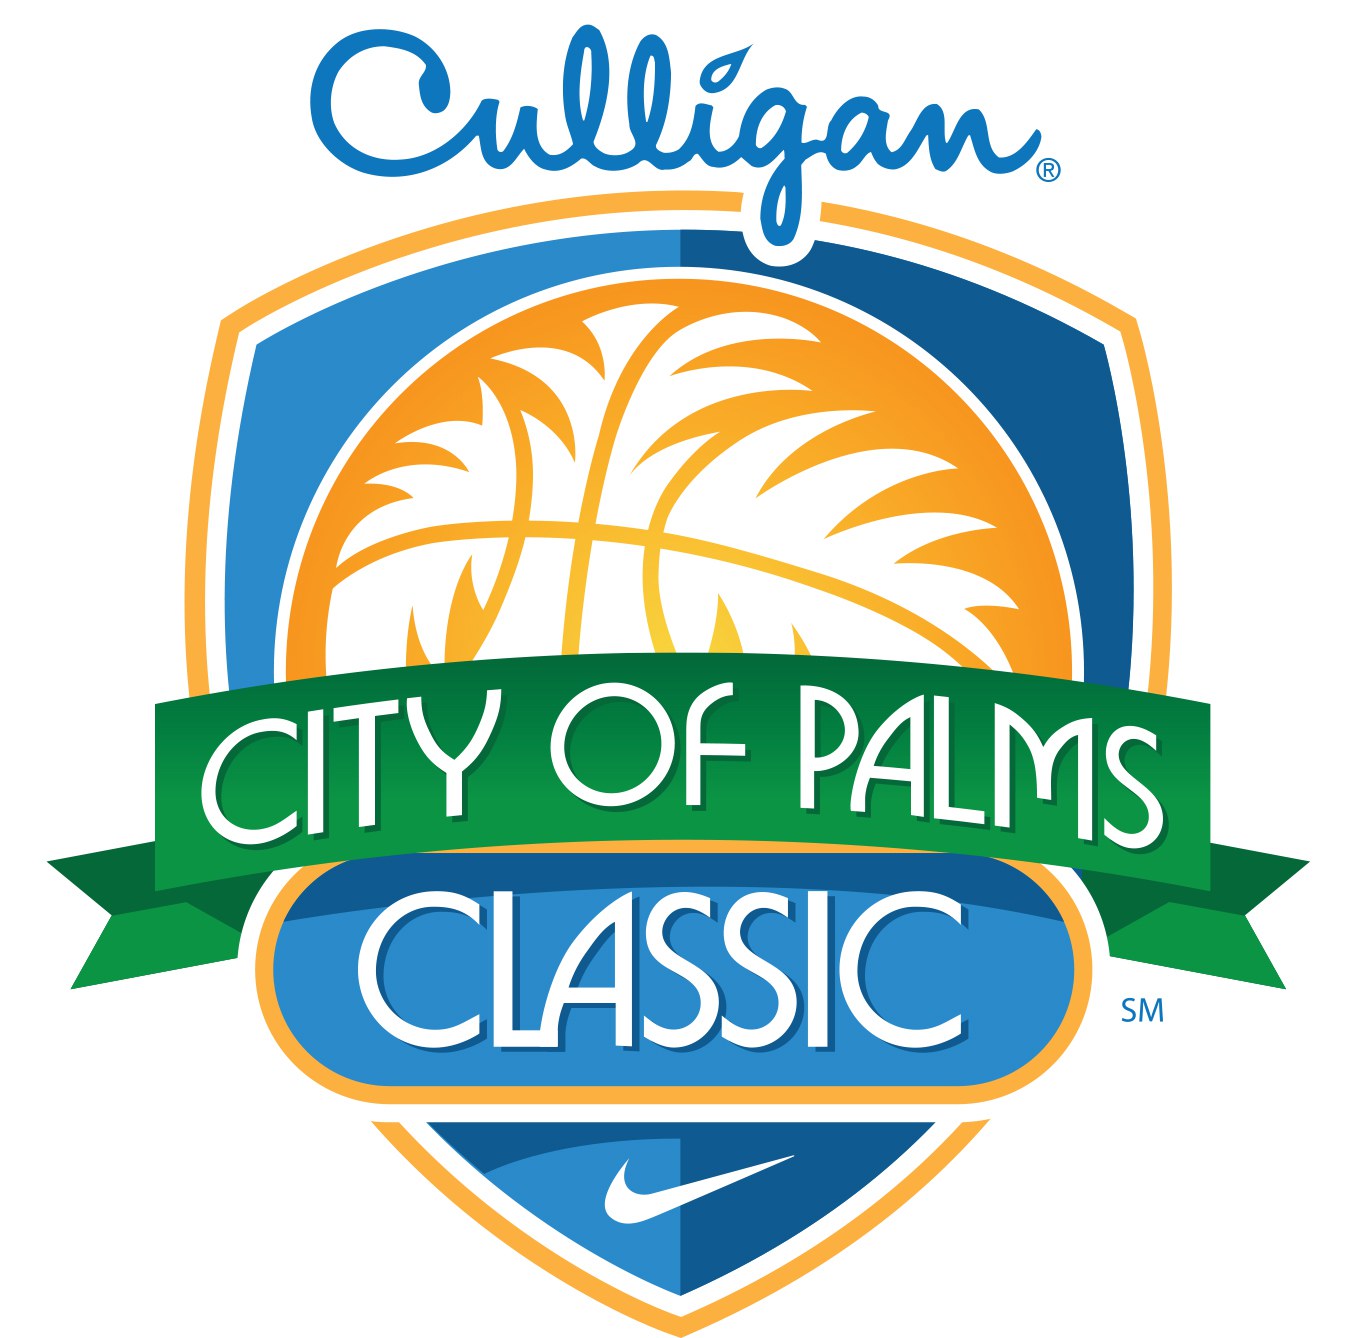 Culligan City of Palms Classic reveals 2016 tournament lineup City of